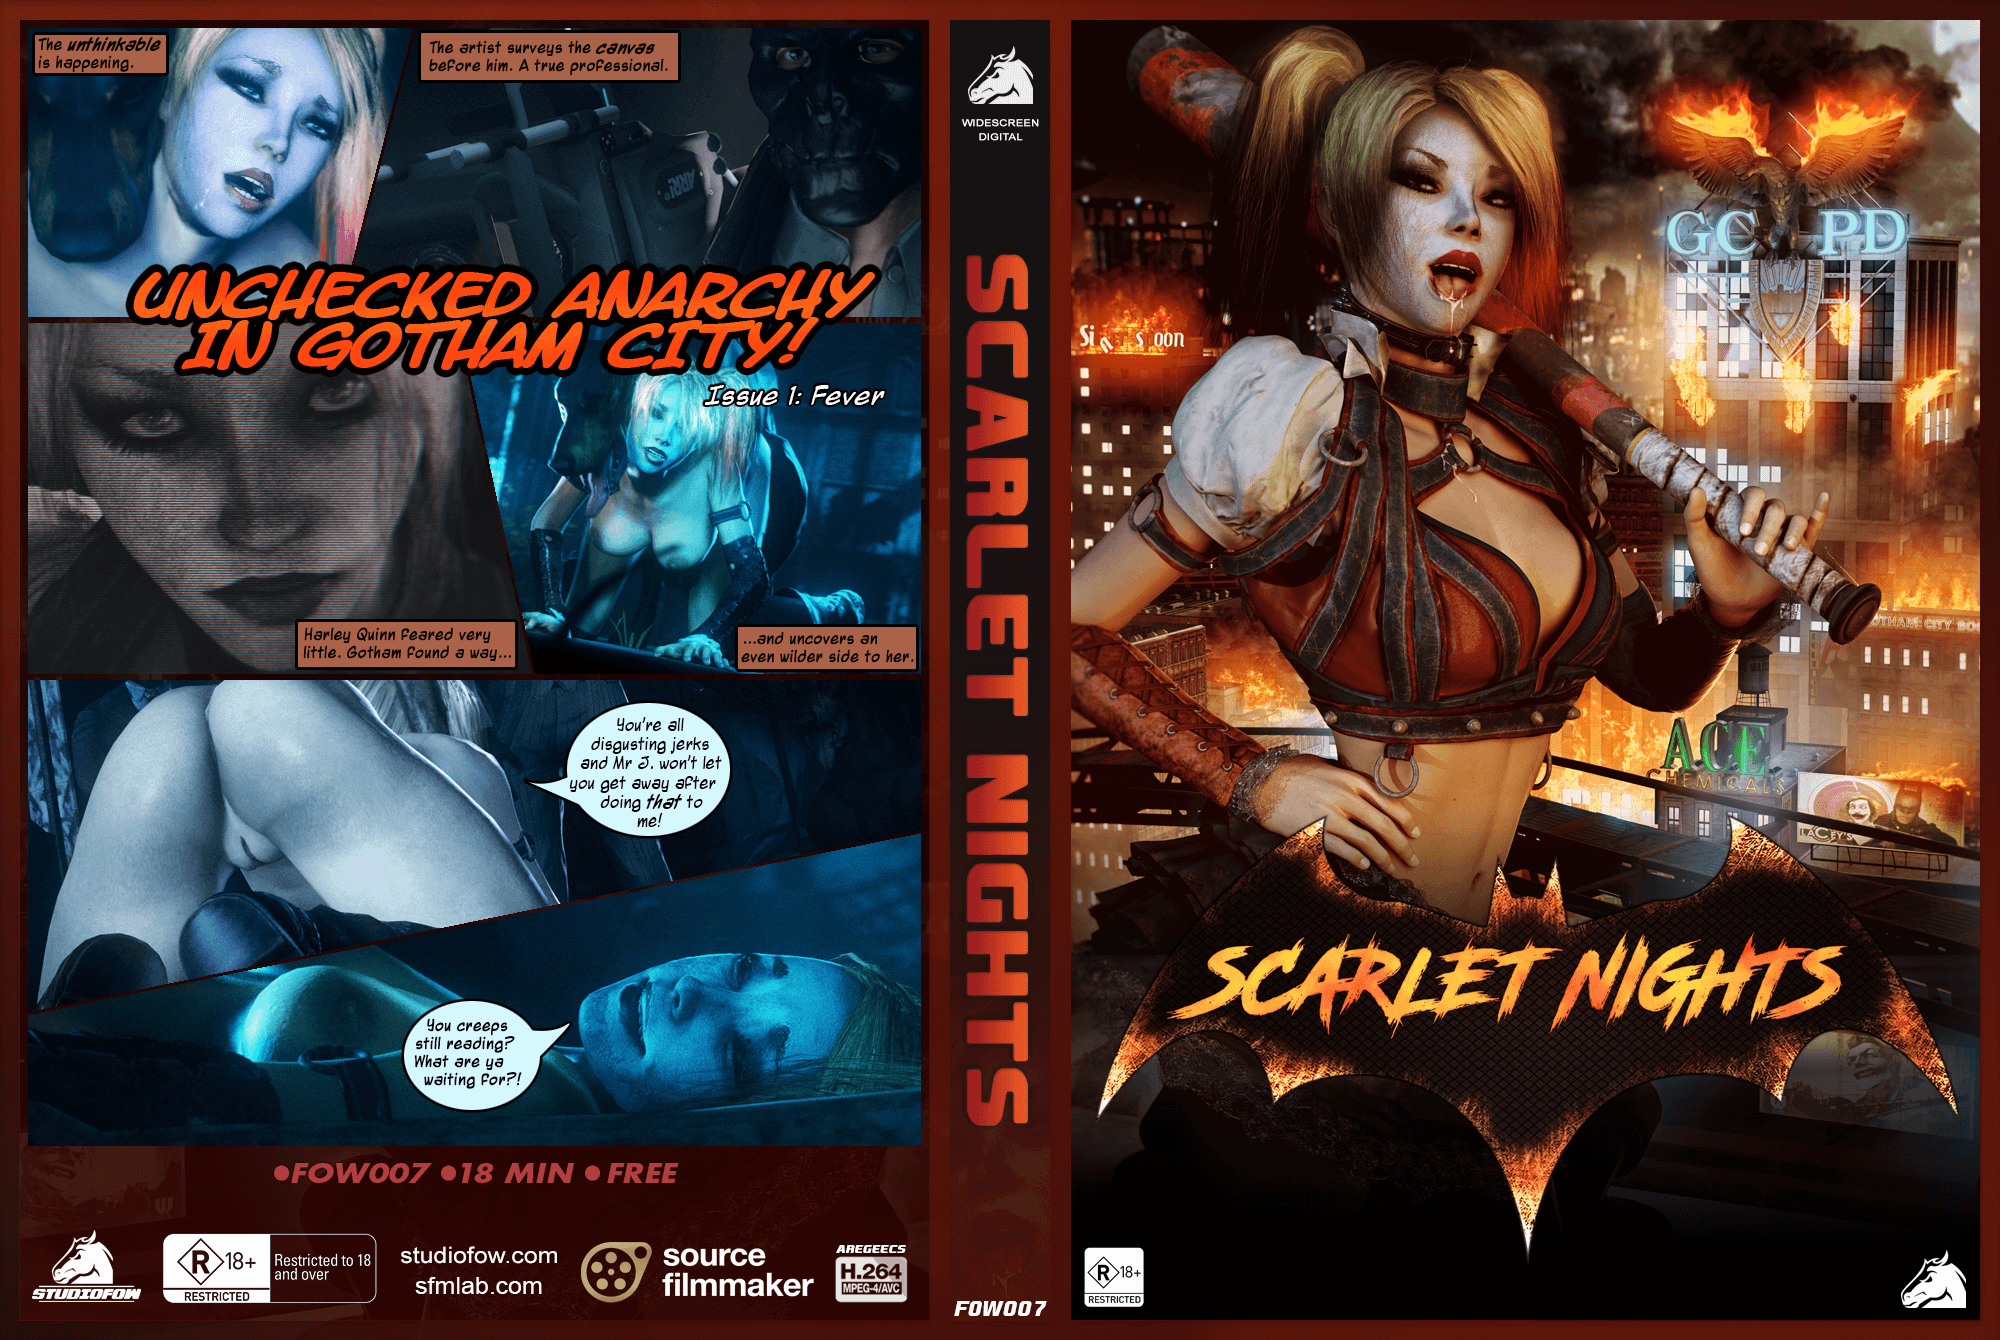 Squeak recommend best of SCARLET NIGHTS of Harley Quinn.